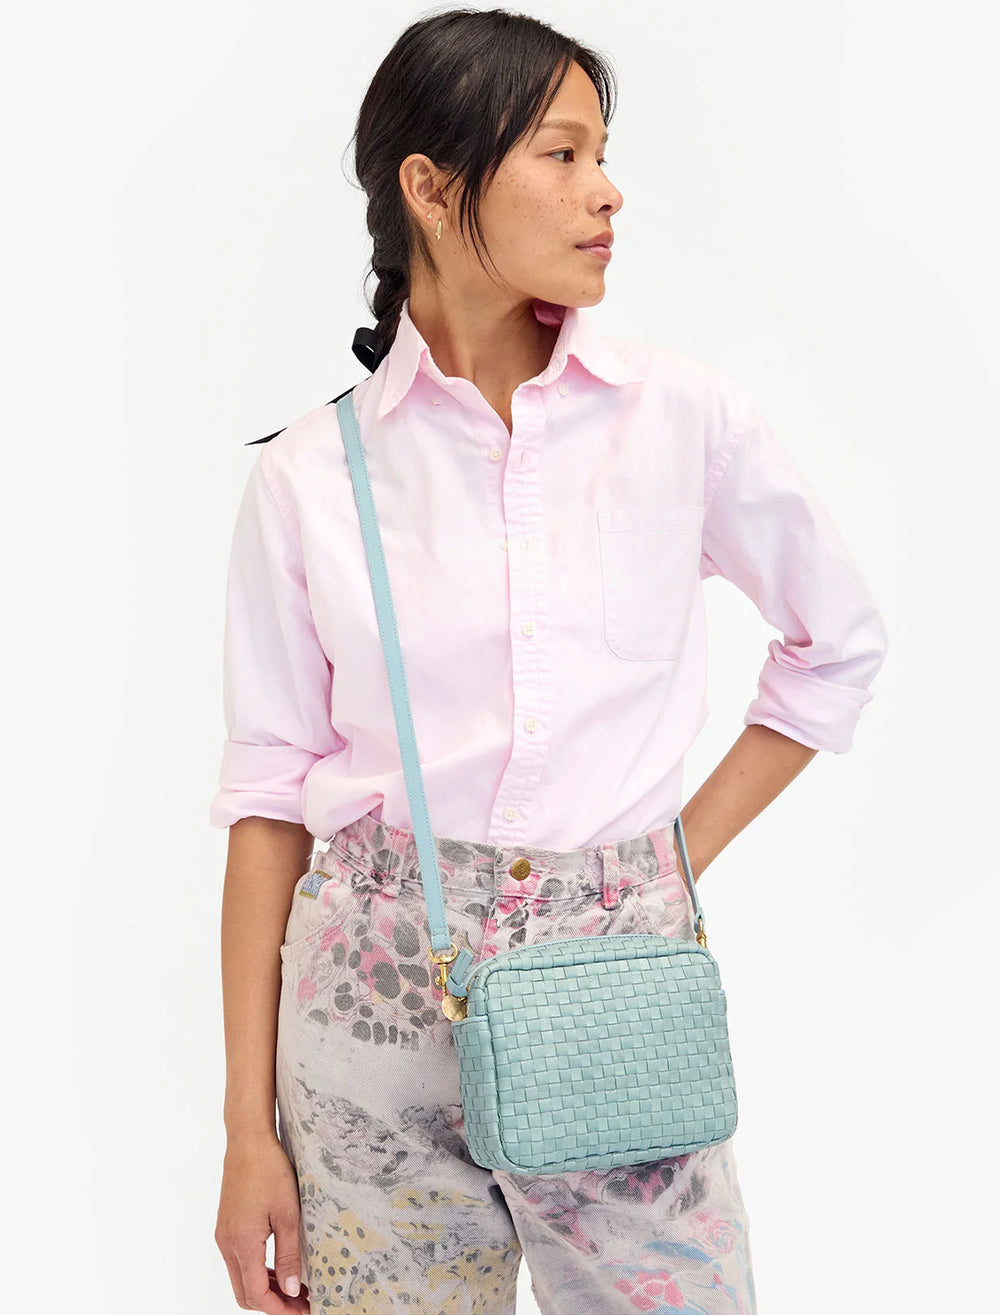 Model wearing Clare V.'s midi sac in sunbleached sky blue woven as a crossbody.